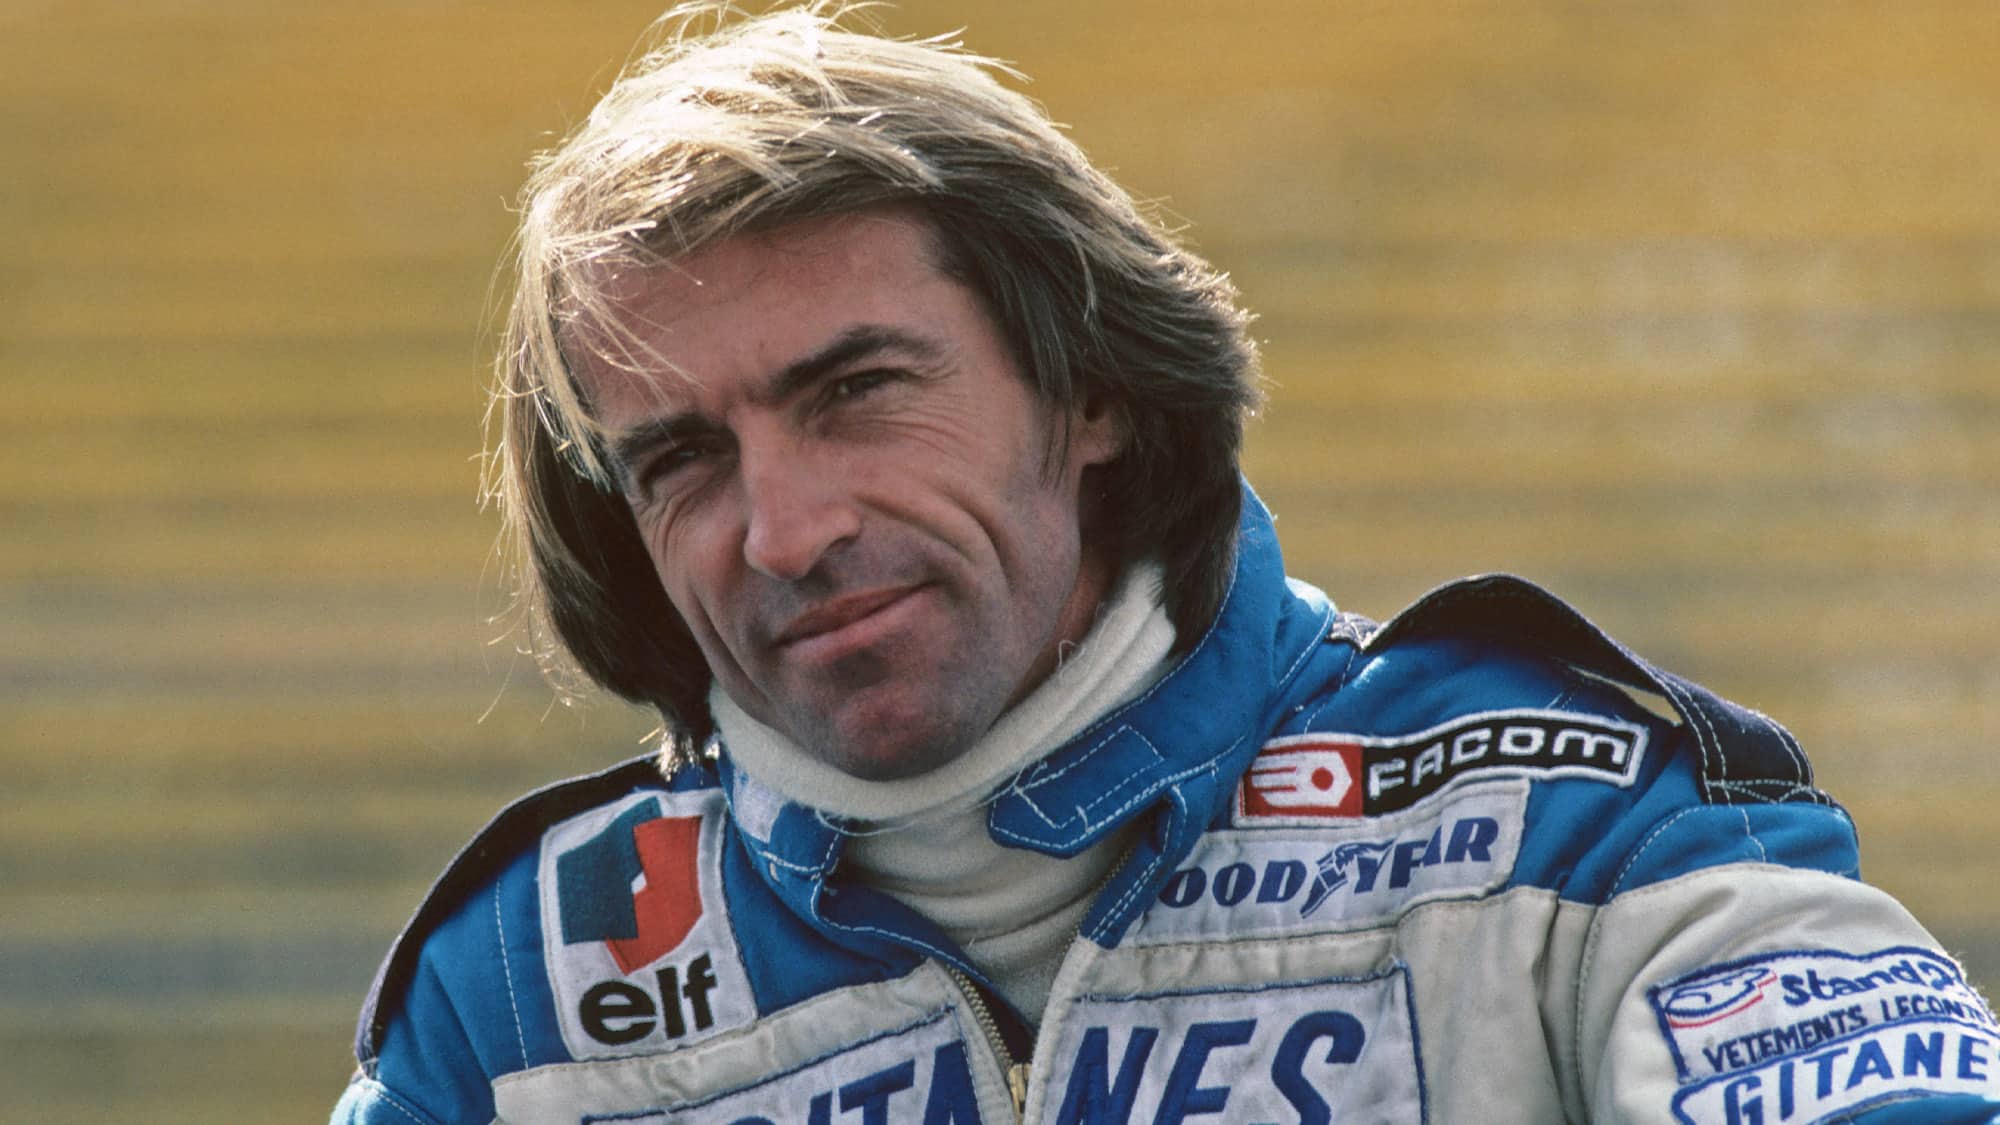 Jacques-Laffite-at-the-1980-Canadian-Grand-Prix.jpg